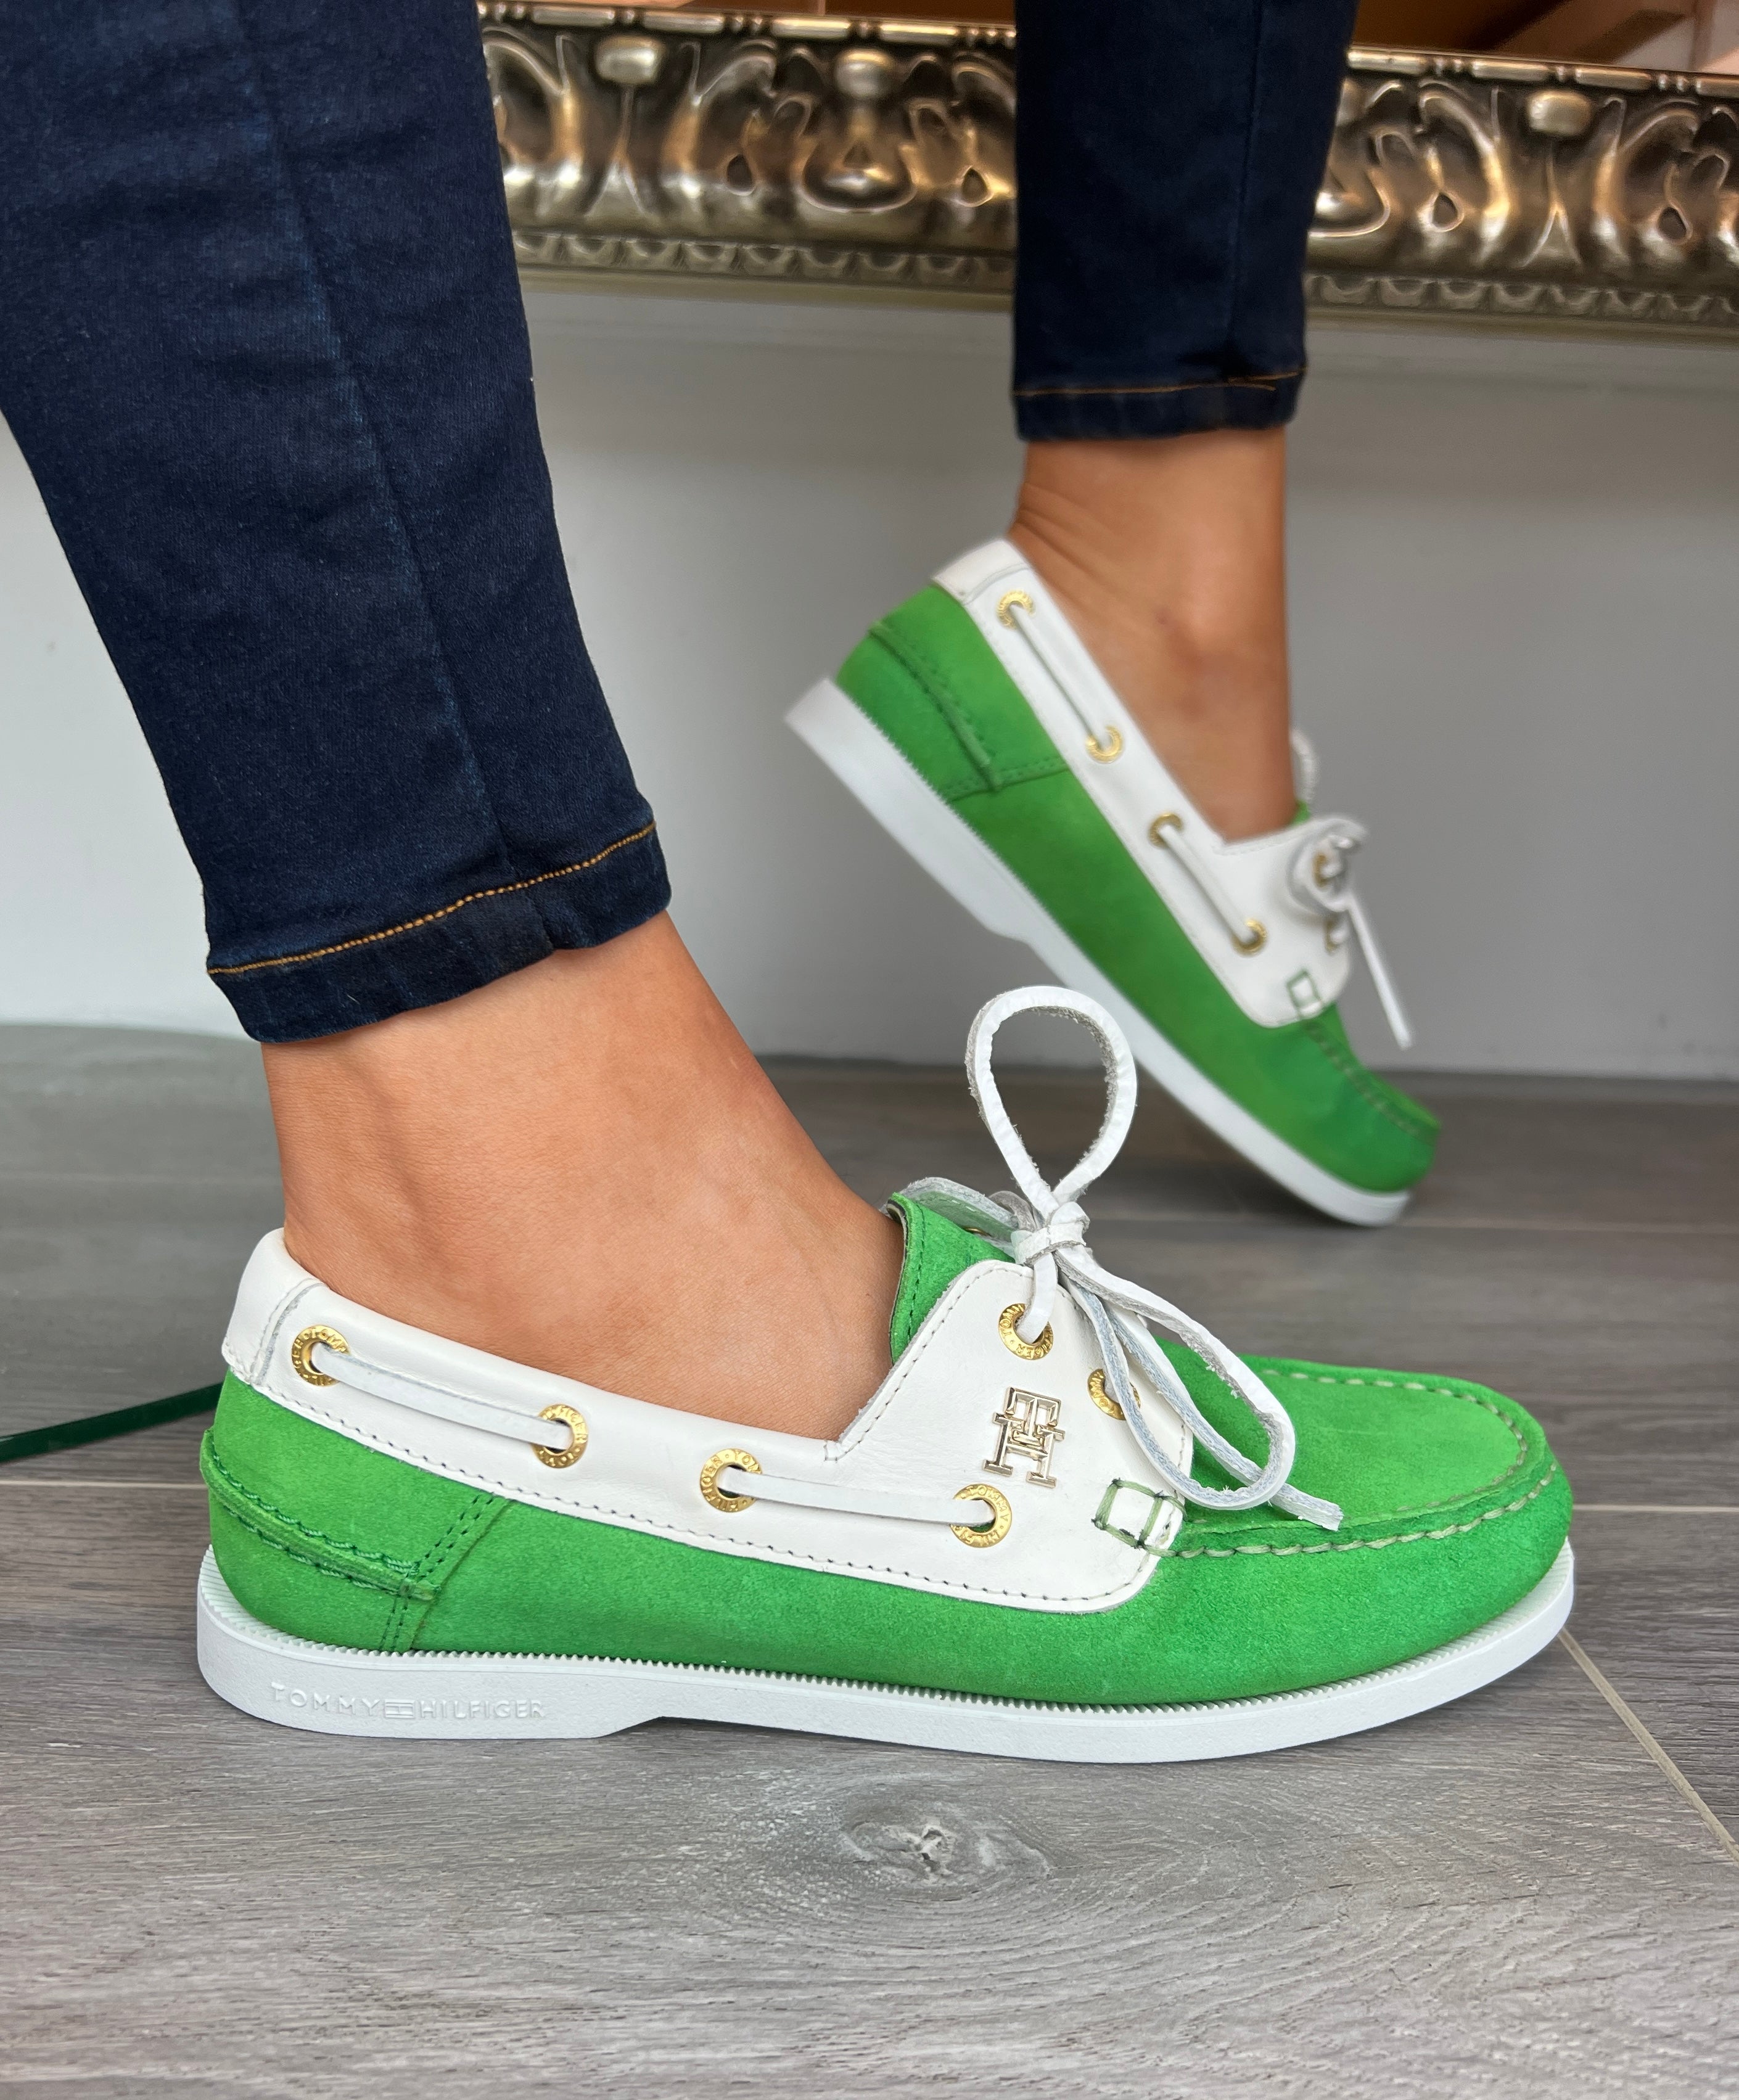 Tommy Hilfiger 7066 - TH Boat Shoe - Spring Lime – Fred Funk